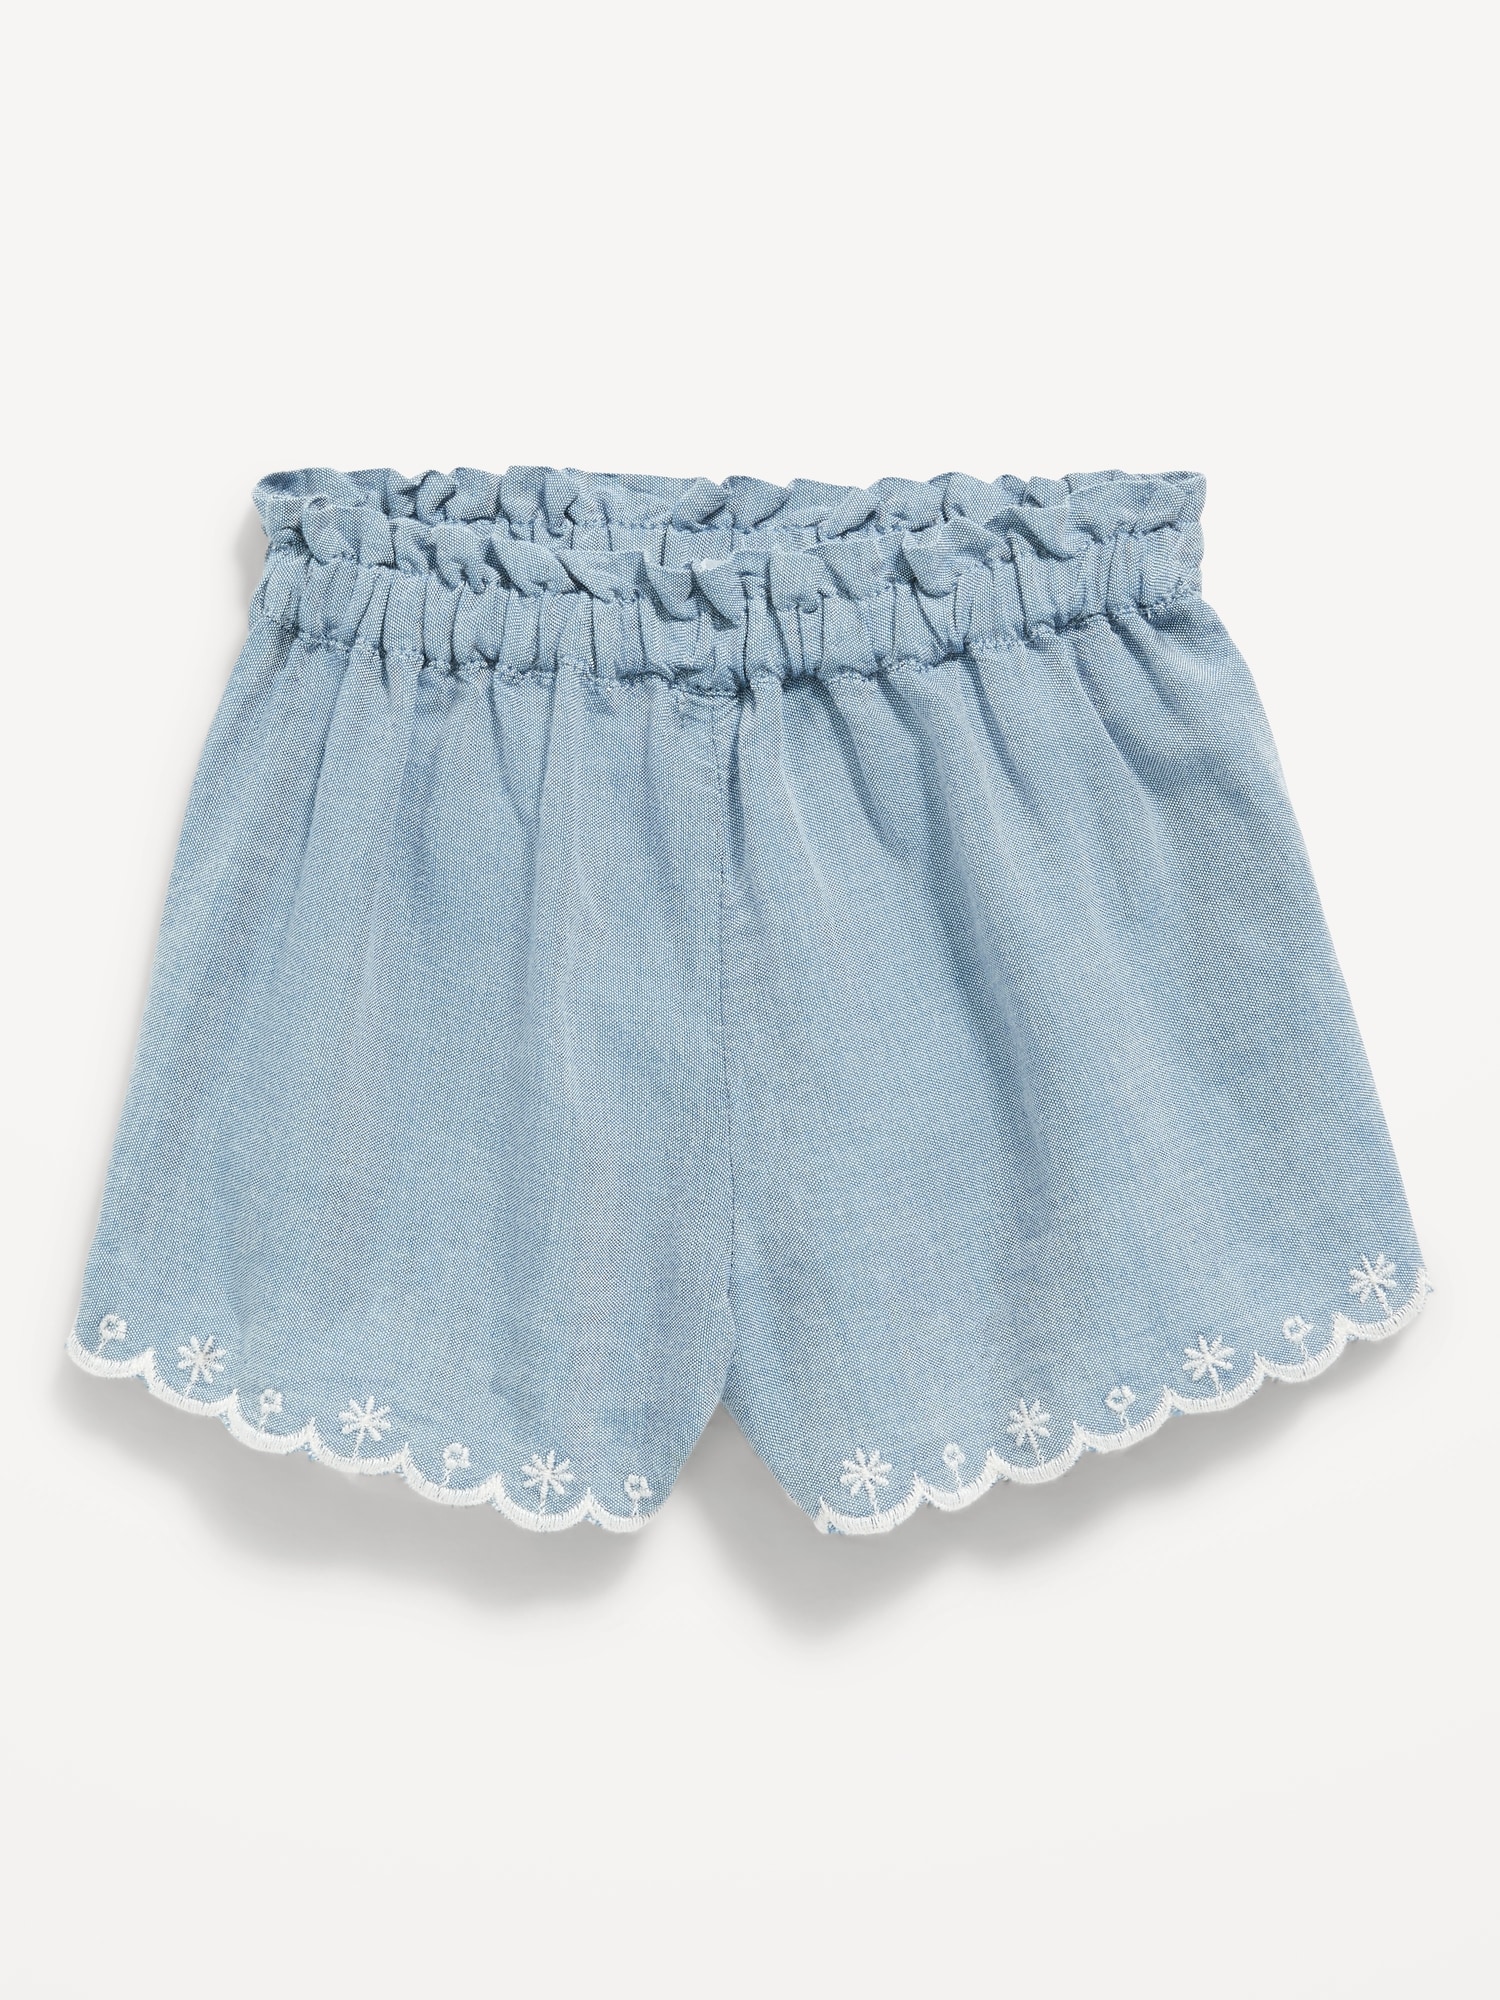 Scallop-Trim Shorts for Baby